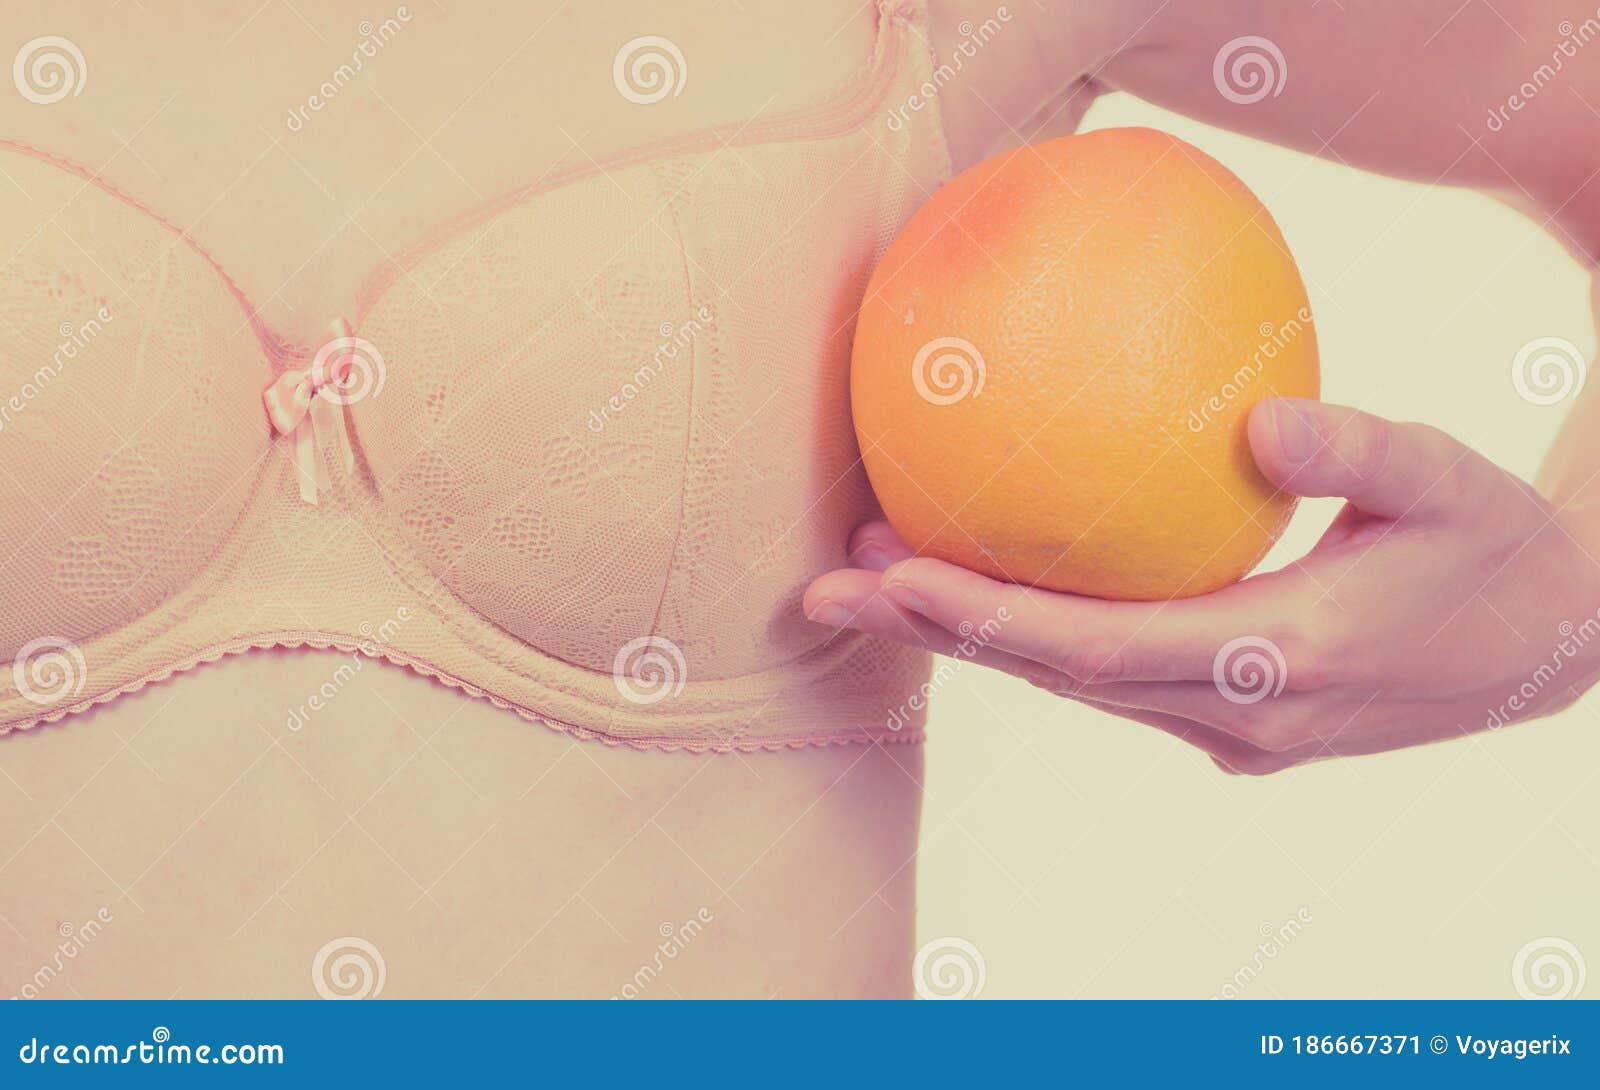 Slim Young Woman Small Boobs Puts Big Orange Fruit In Her Bra. Breast  Enlargement Size Correction Concept. Stock Photo, Picture and Royalty Free  Image. Image 174498332.